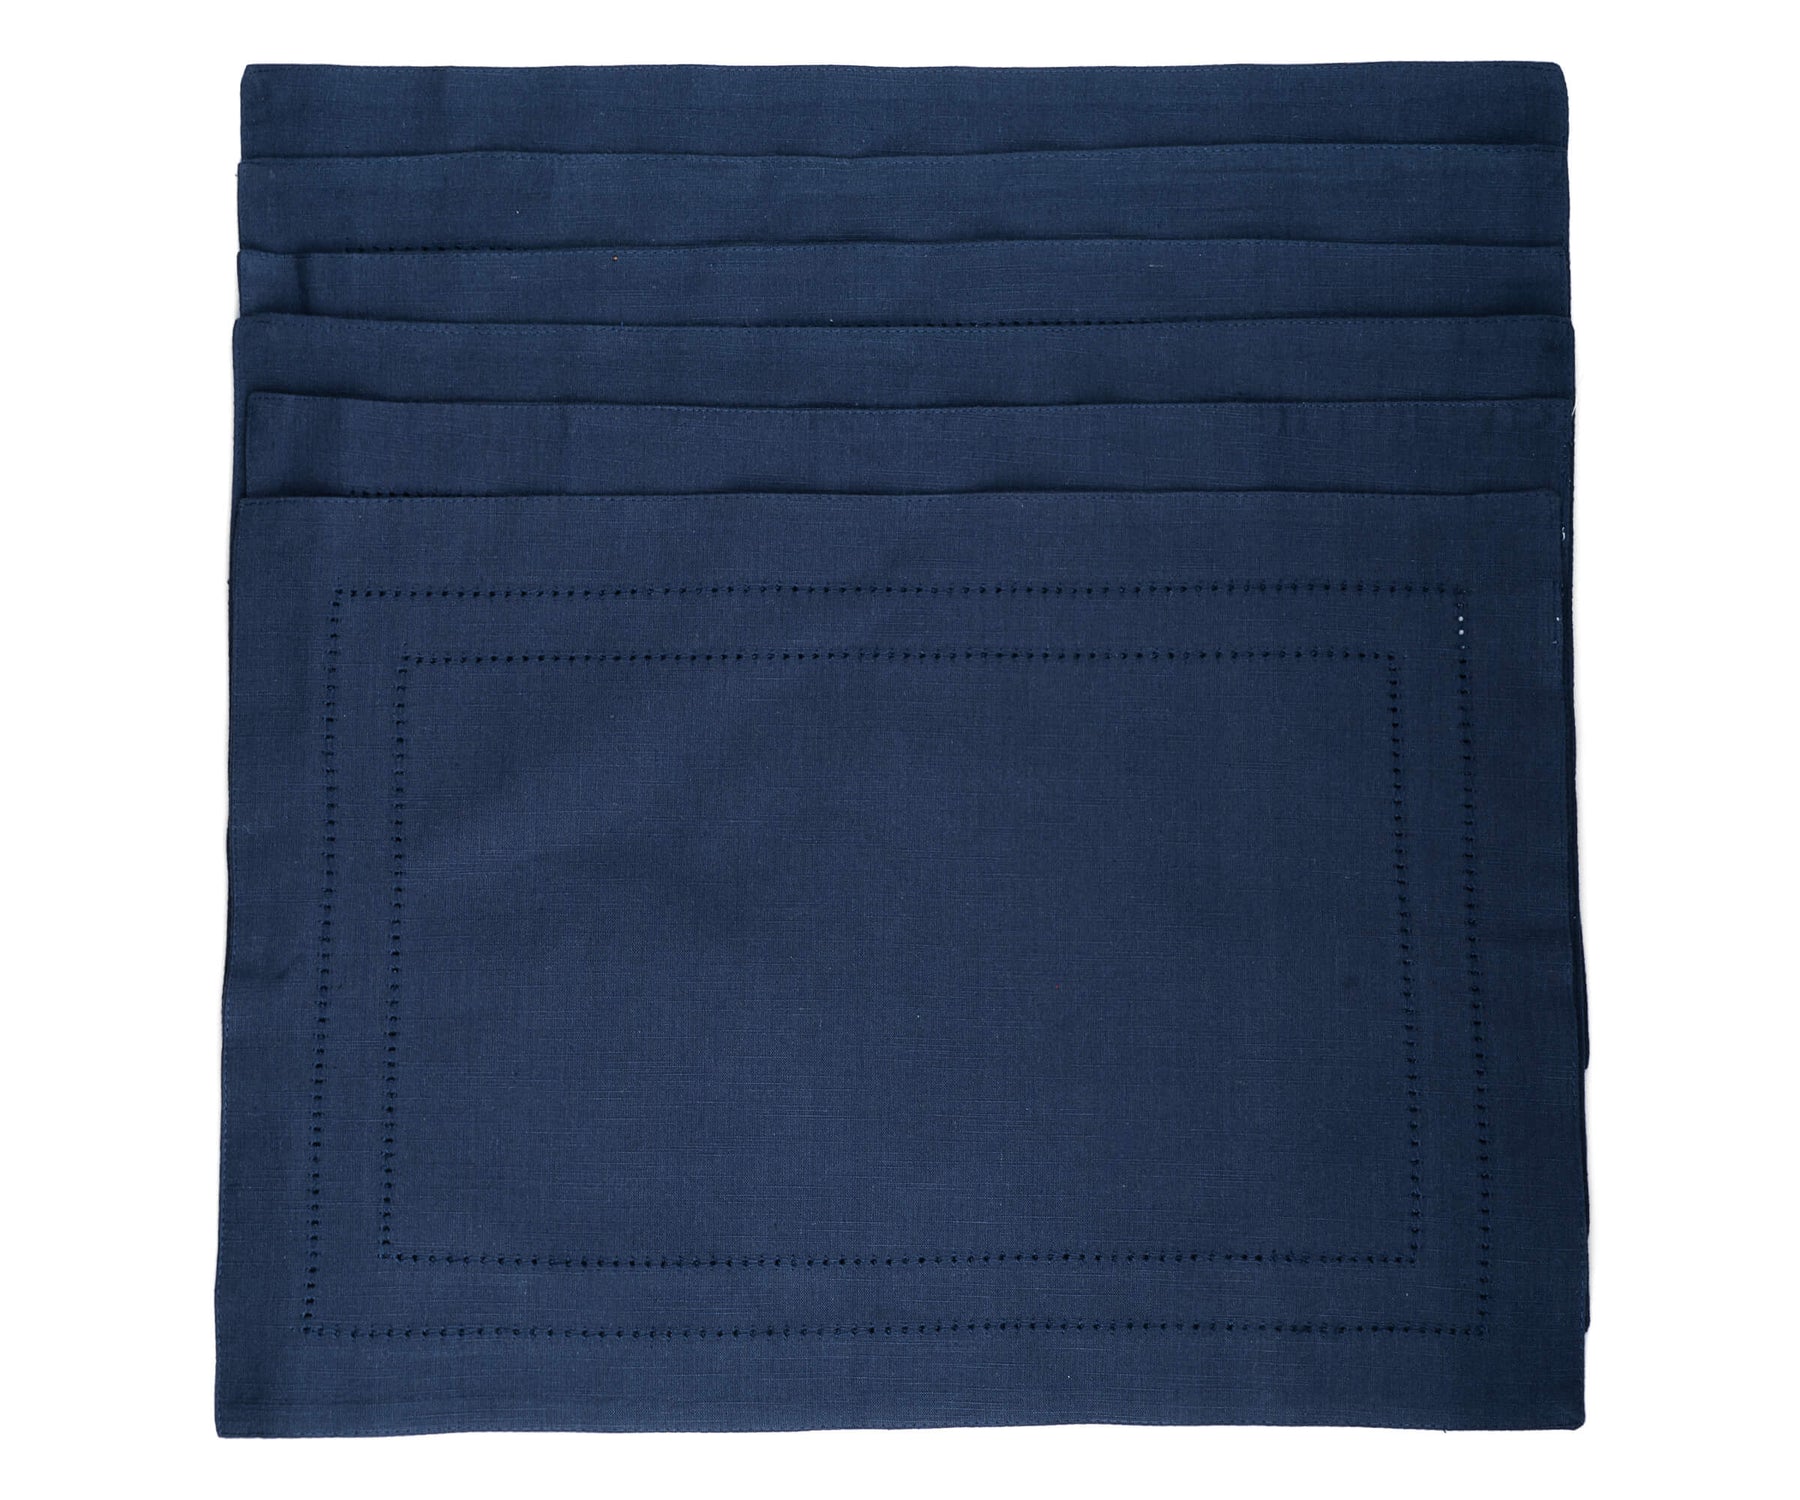 The rectangular placemats of size 13×18",a set of 6 hem stitched navy blue table placemats are arranged one above another.